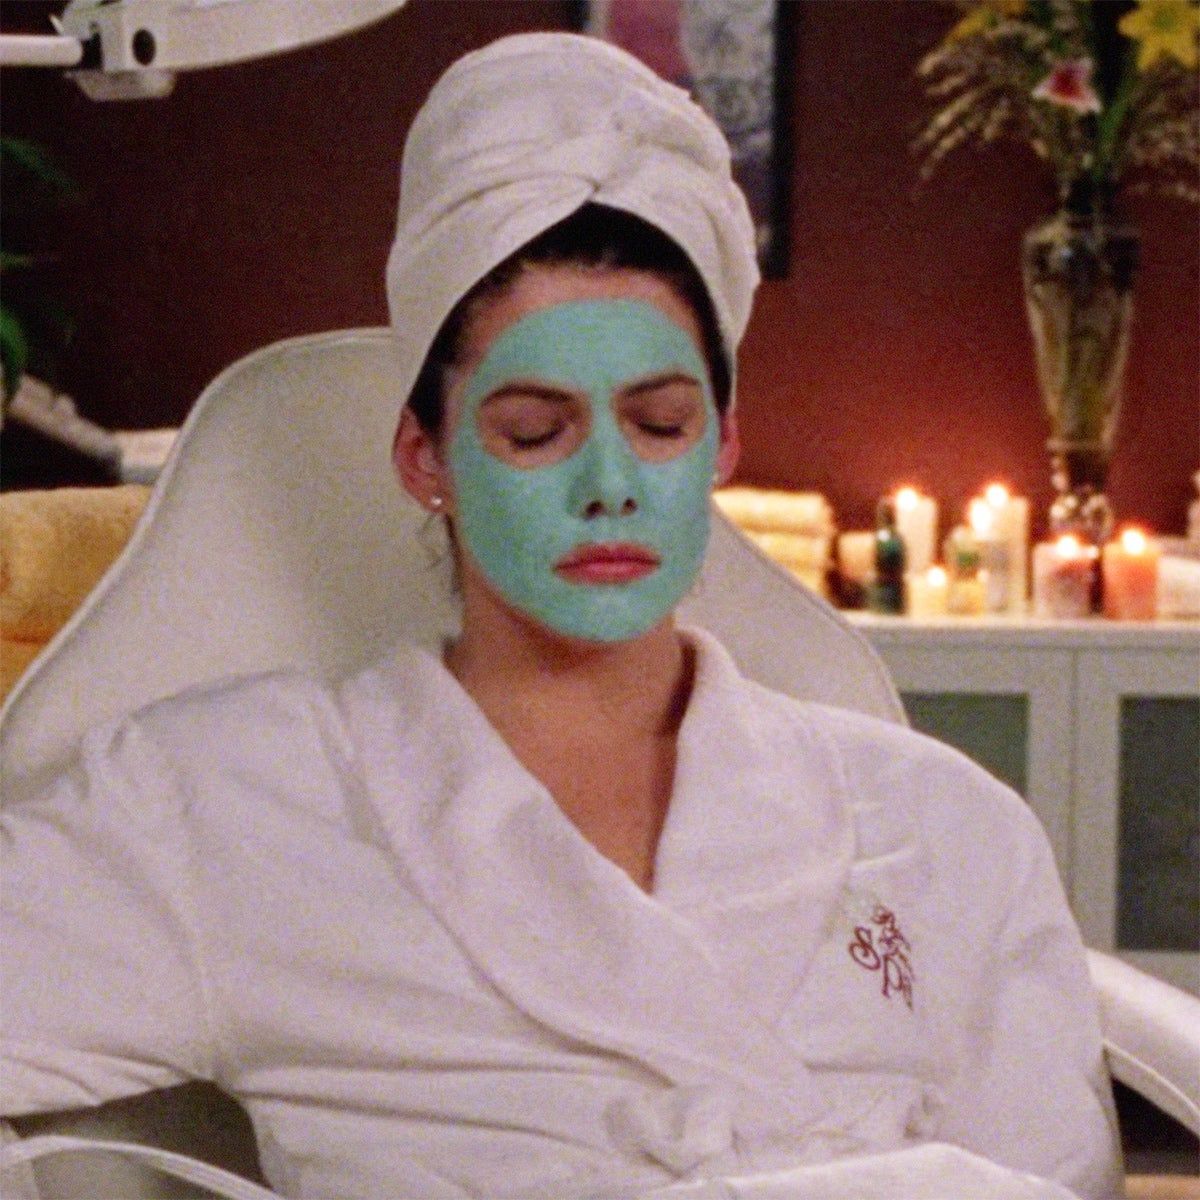 Woman with eyes closed in a spa robe and towel with a green face mask